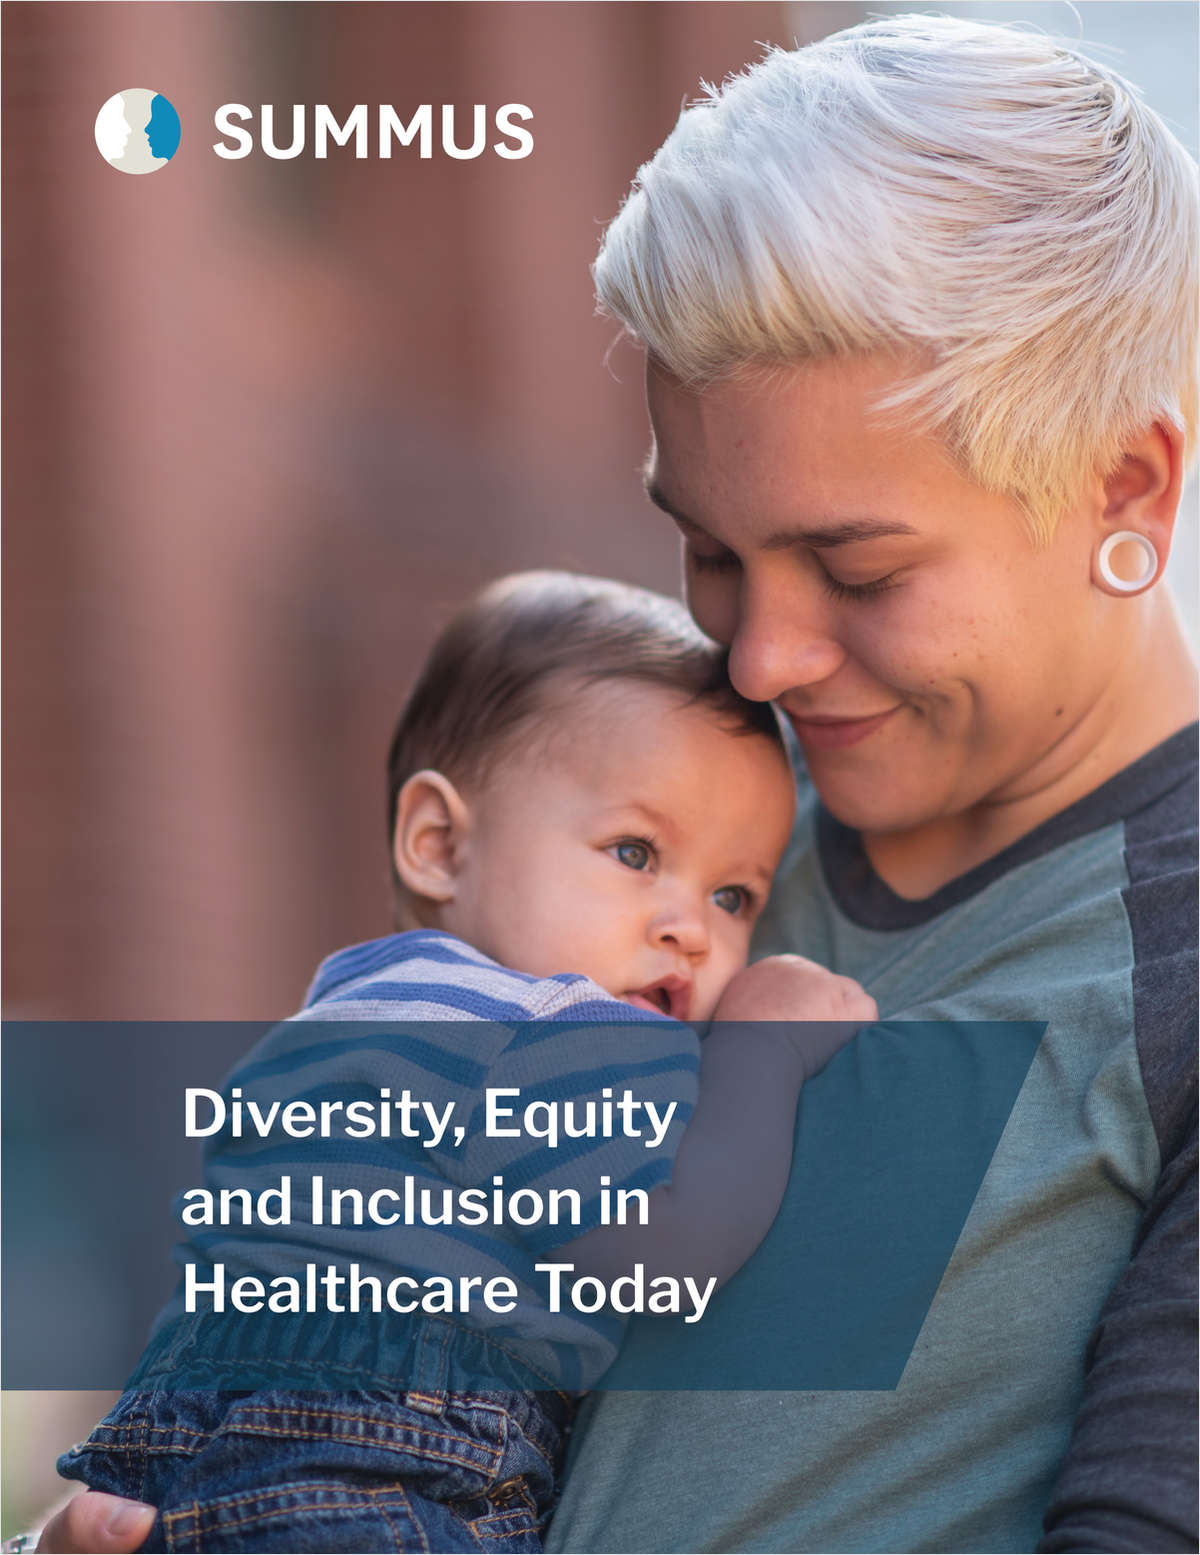 Video: Diversity, Equity, and Inclusion in Healthcare Today